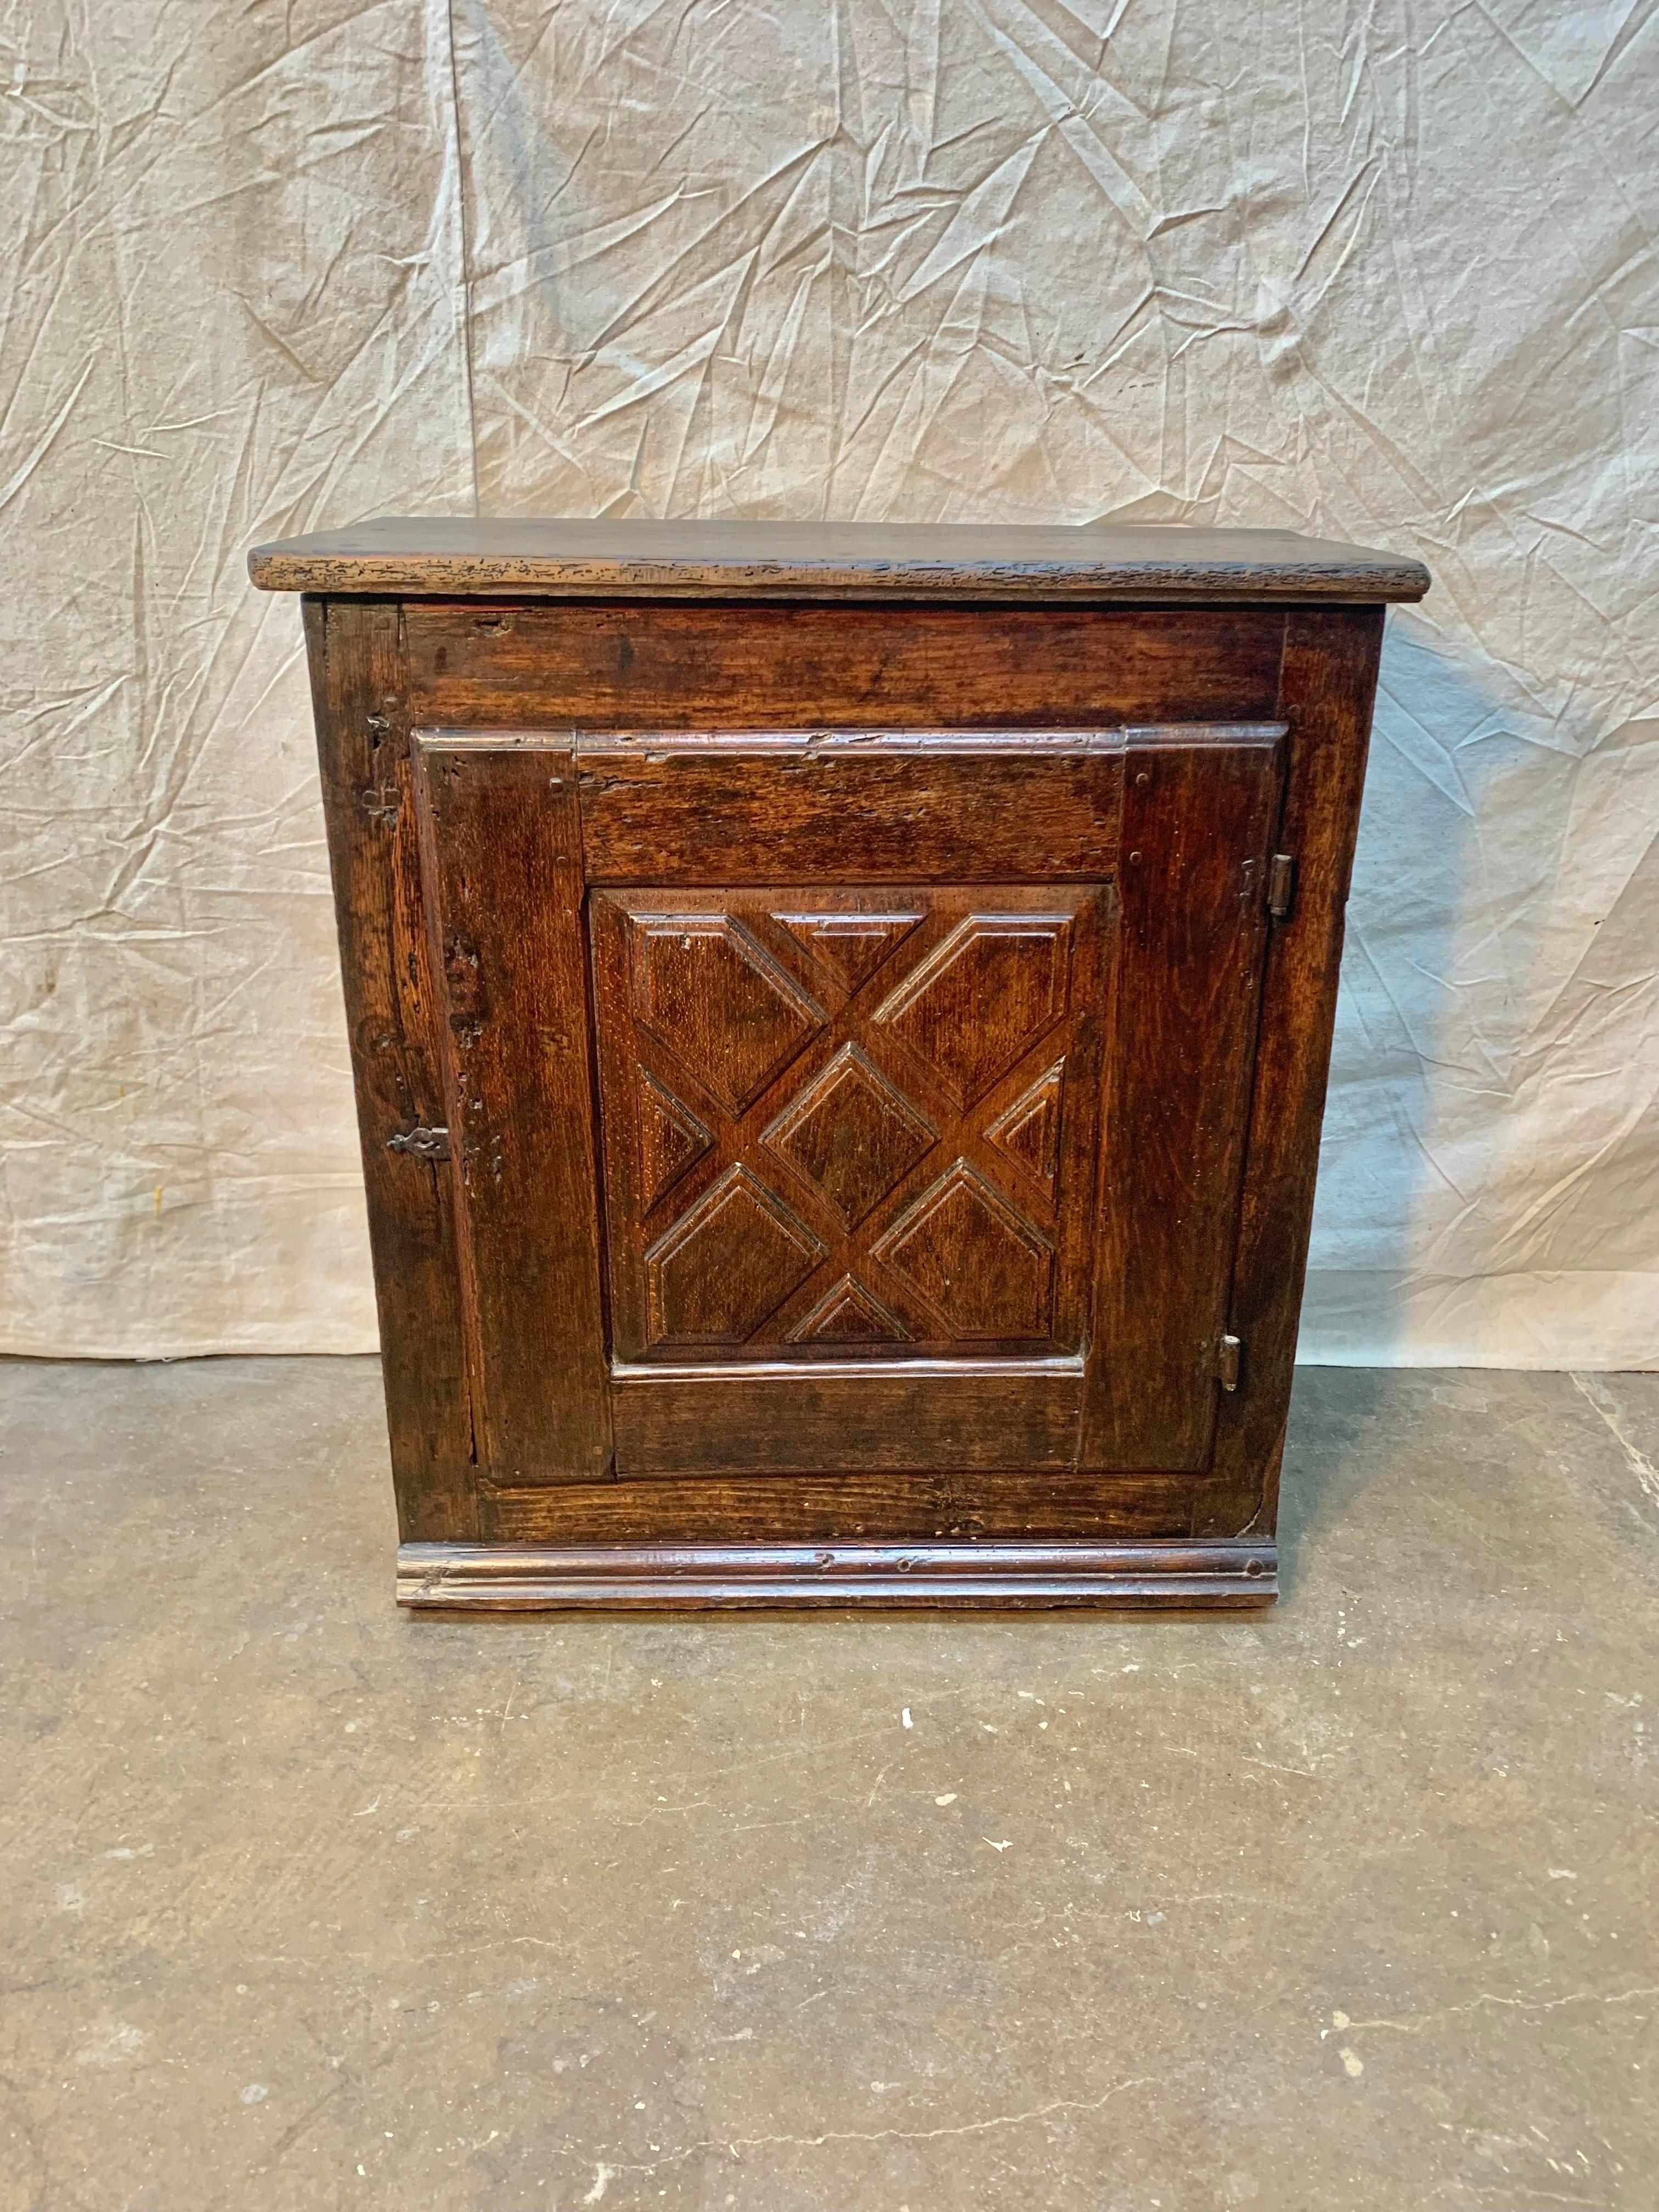 This beautiful primitive 18th century Spanish Walnut Cabinet features one door that has been hand carved in a geometric pattern and opens to reveal one shelf which is typical for this type of Spanish furniture. The piece retains its original hand